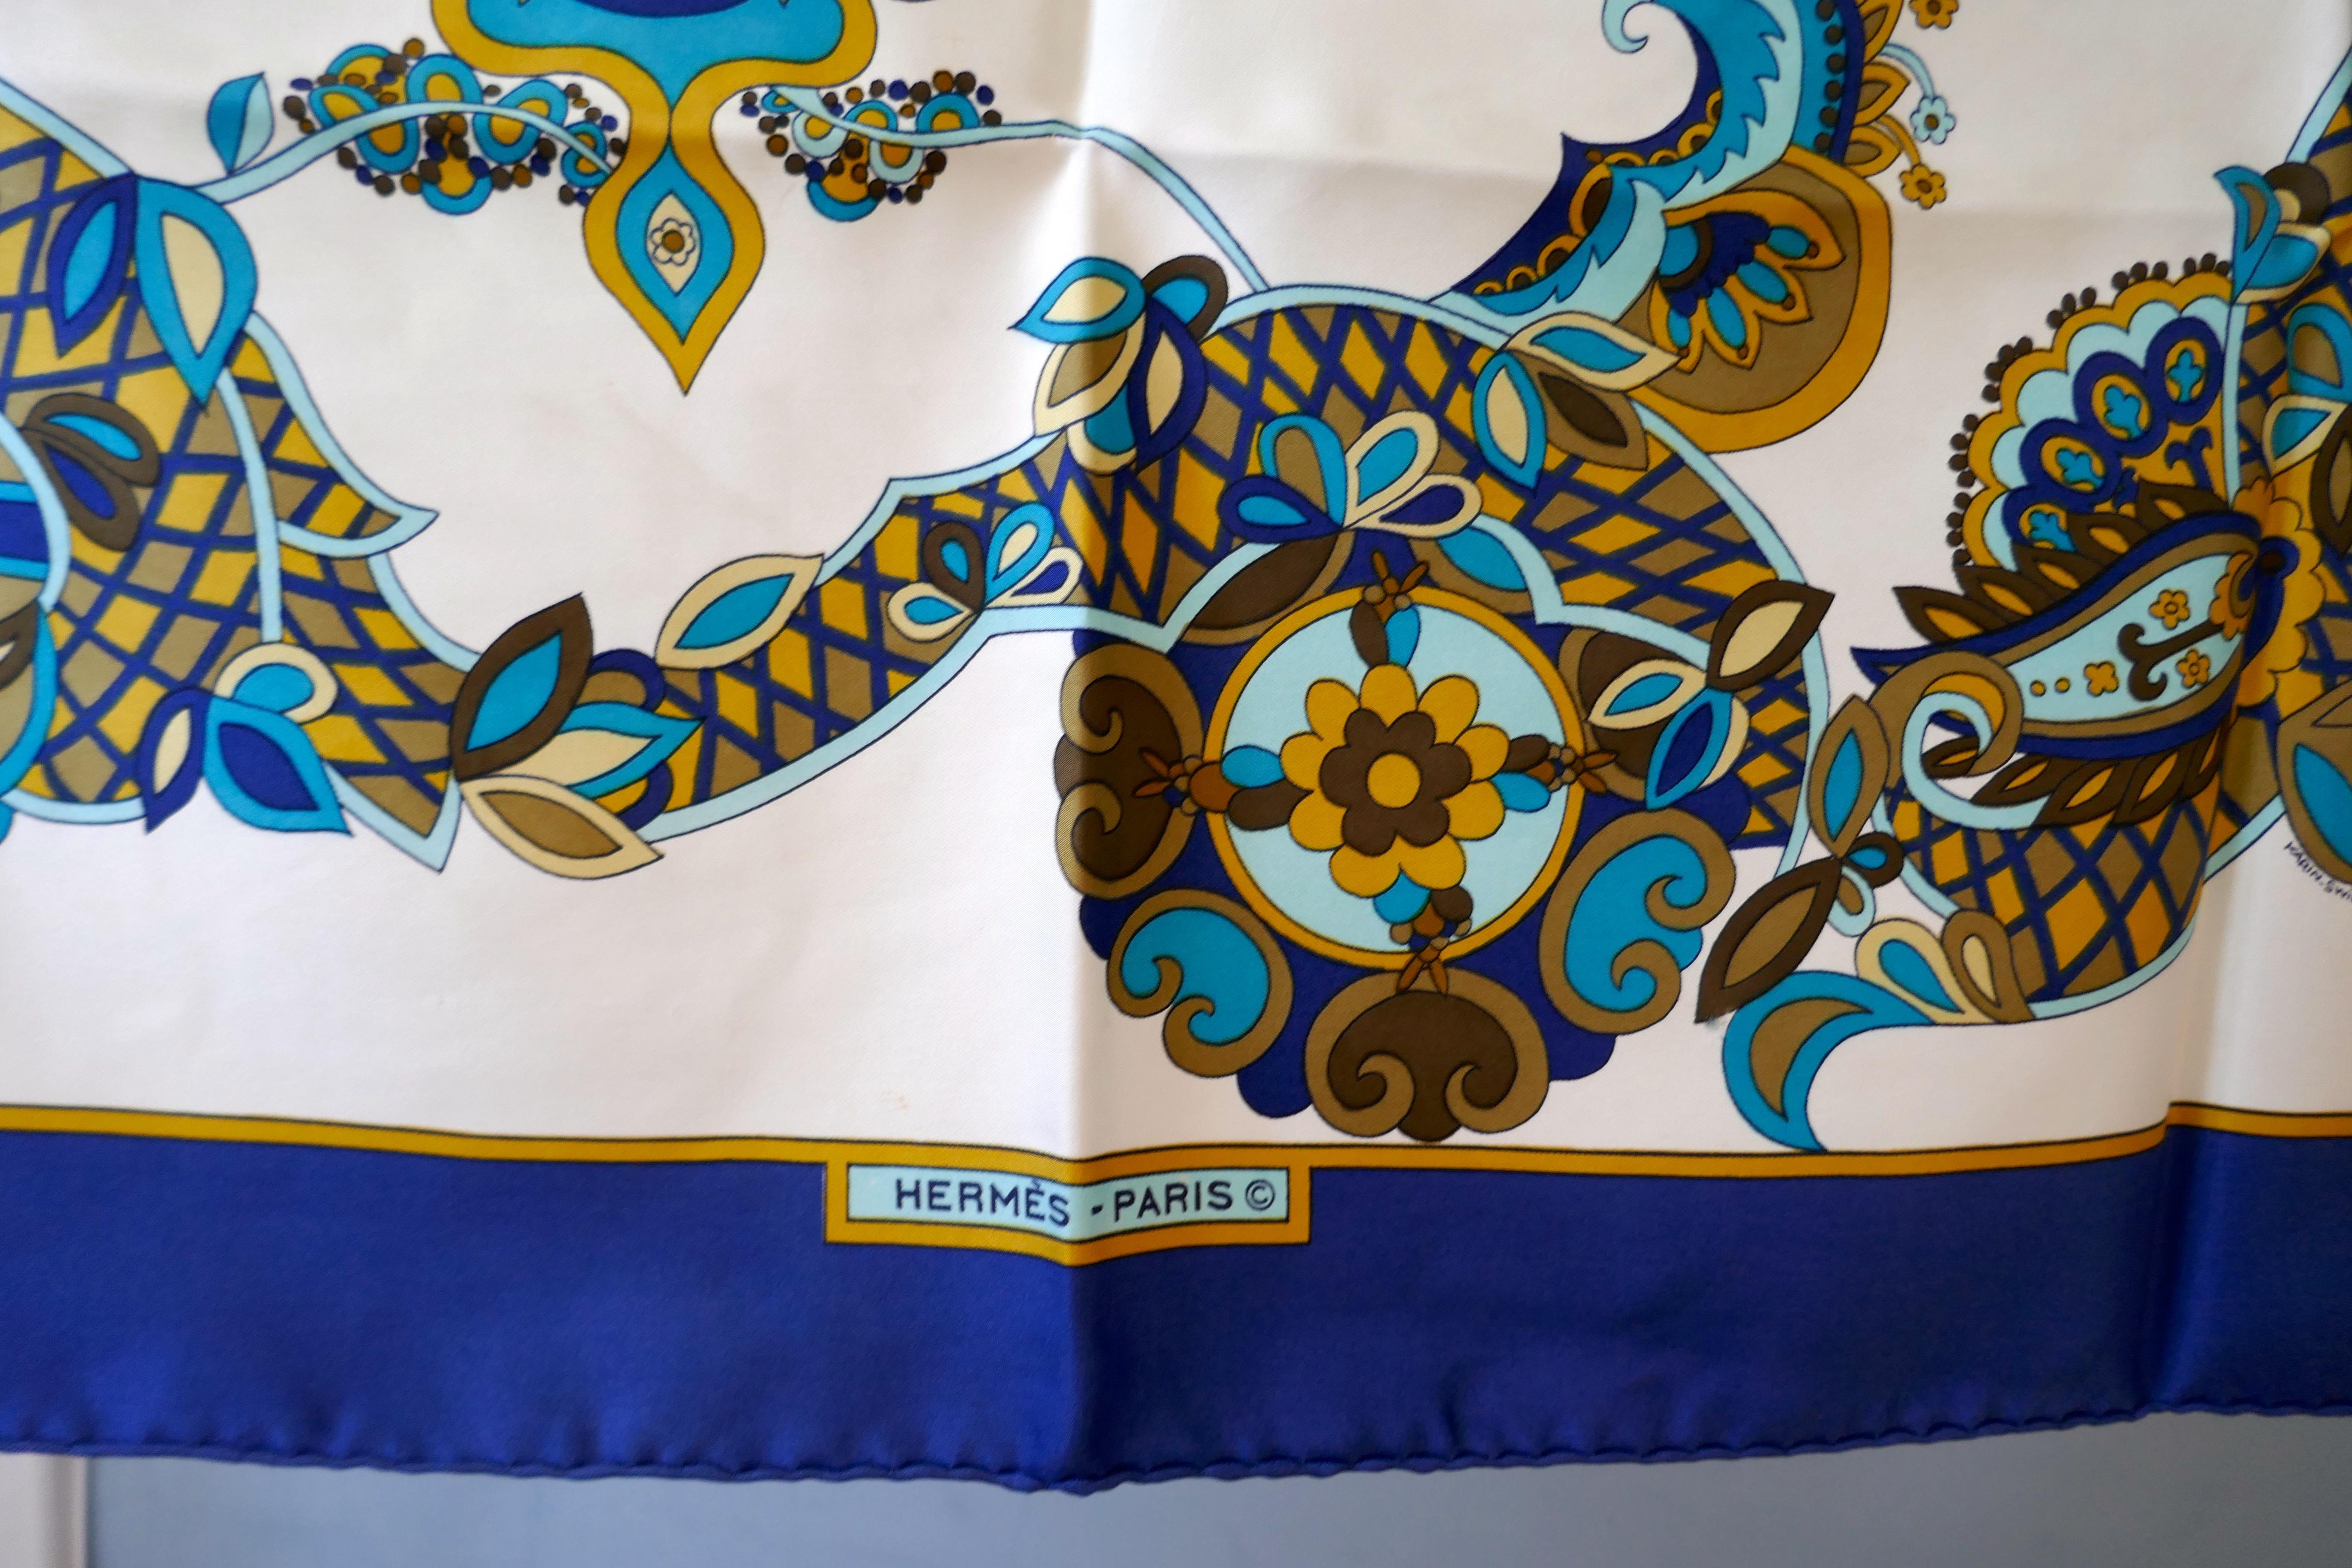 Very Rare 1972 Hermes Silk Scarf “ Cendrillon ” (Cinderella) by  Karen Swildens

A Stunning, Vintage, Authentic un worn original Hermes Silk Scarf, with an accent towards Christmas
This is an utter delight the artistic detail is superb and the